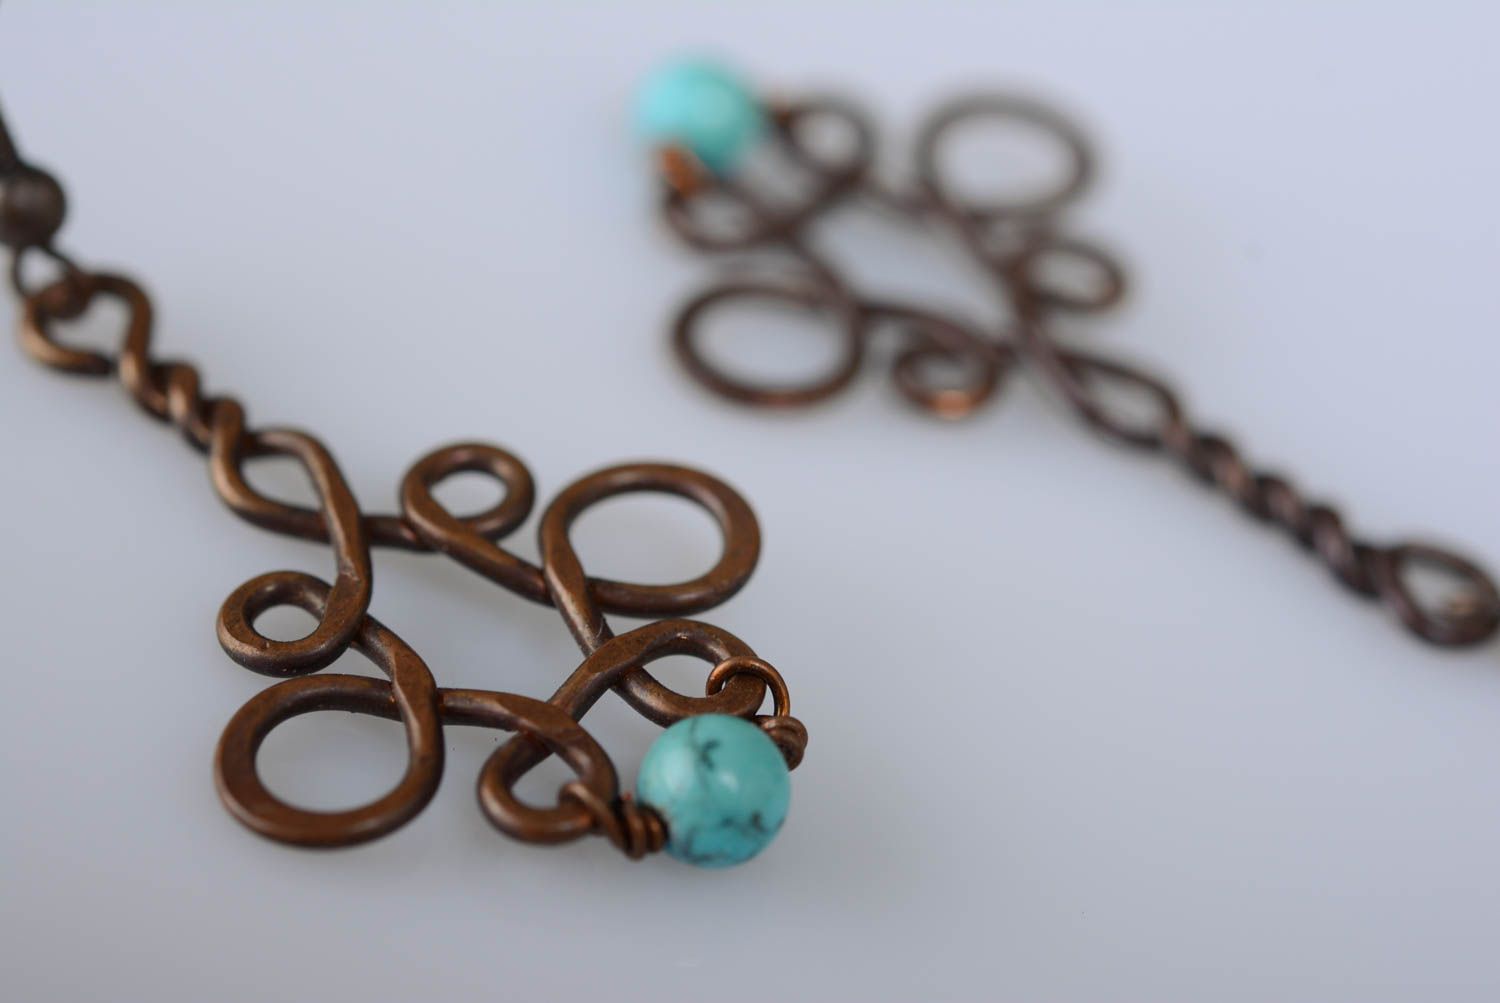 Big earrings made of copper using wire wrap technique with artificial turquoise photo 2